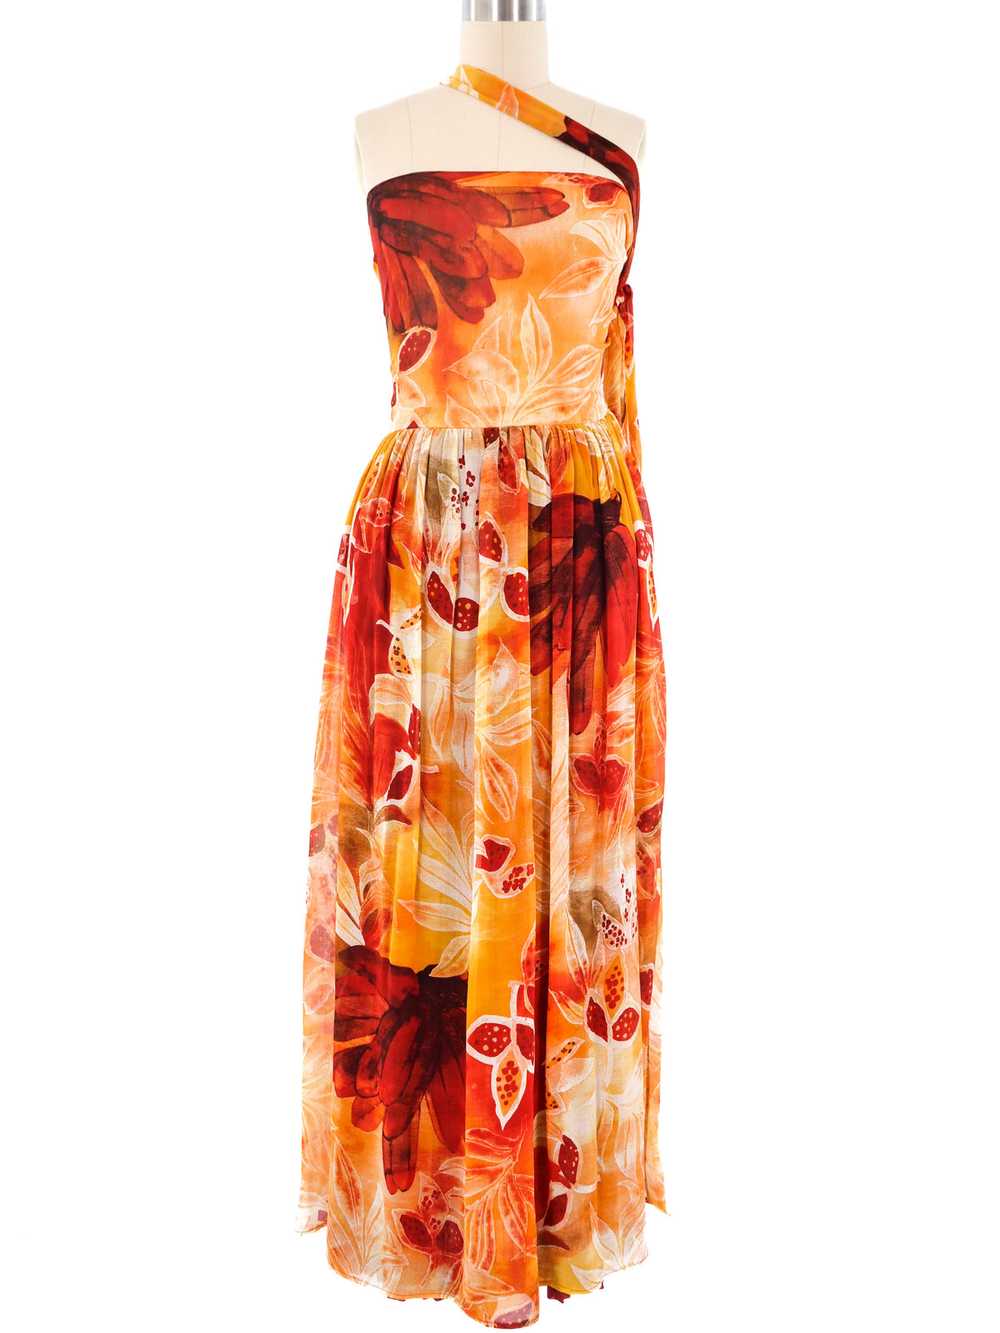 Valentino Floral Chiffon Wrap Gown - image 1